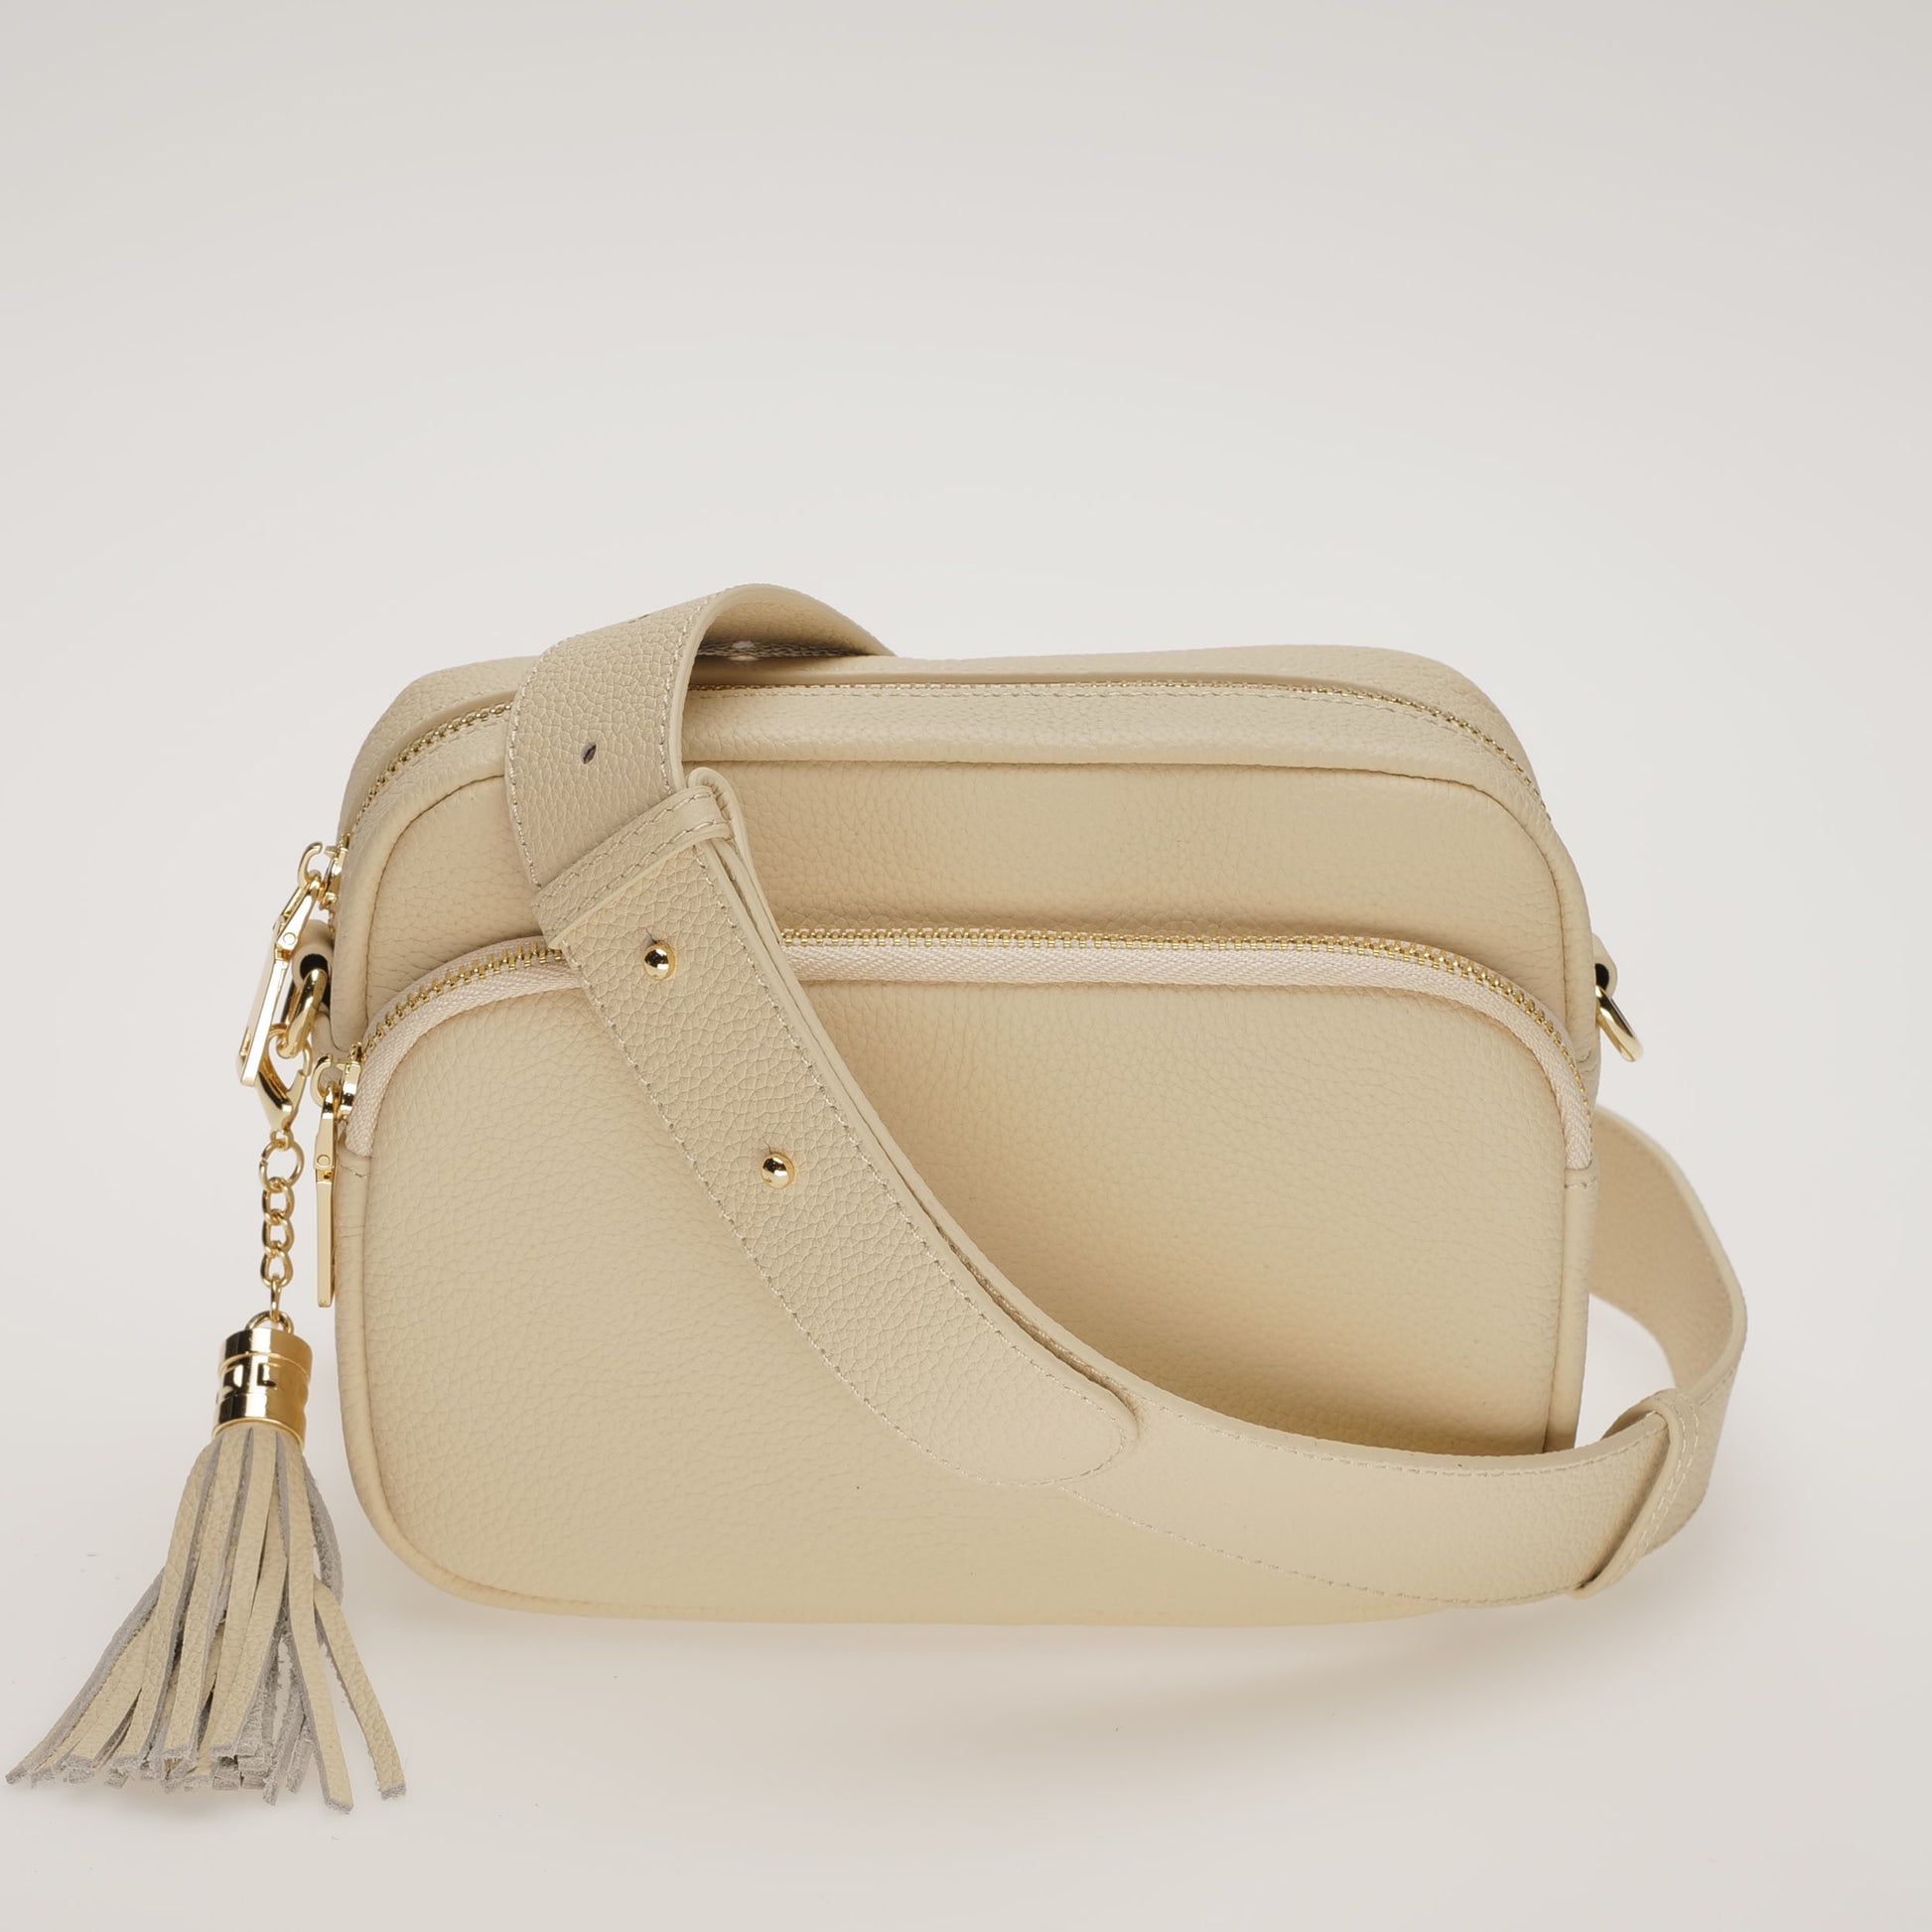 Swoon London Downton in Off White with Matching leather strap